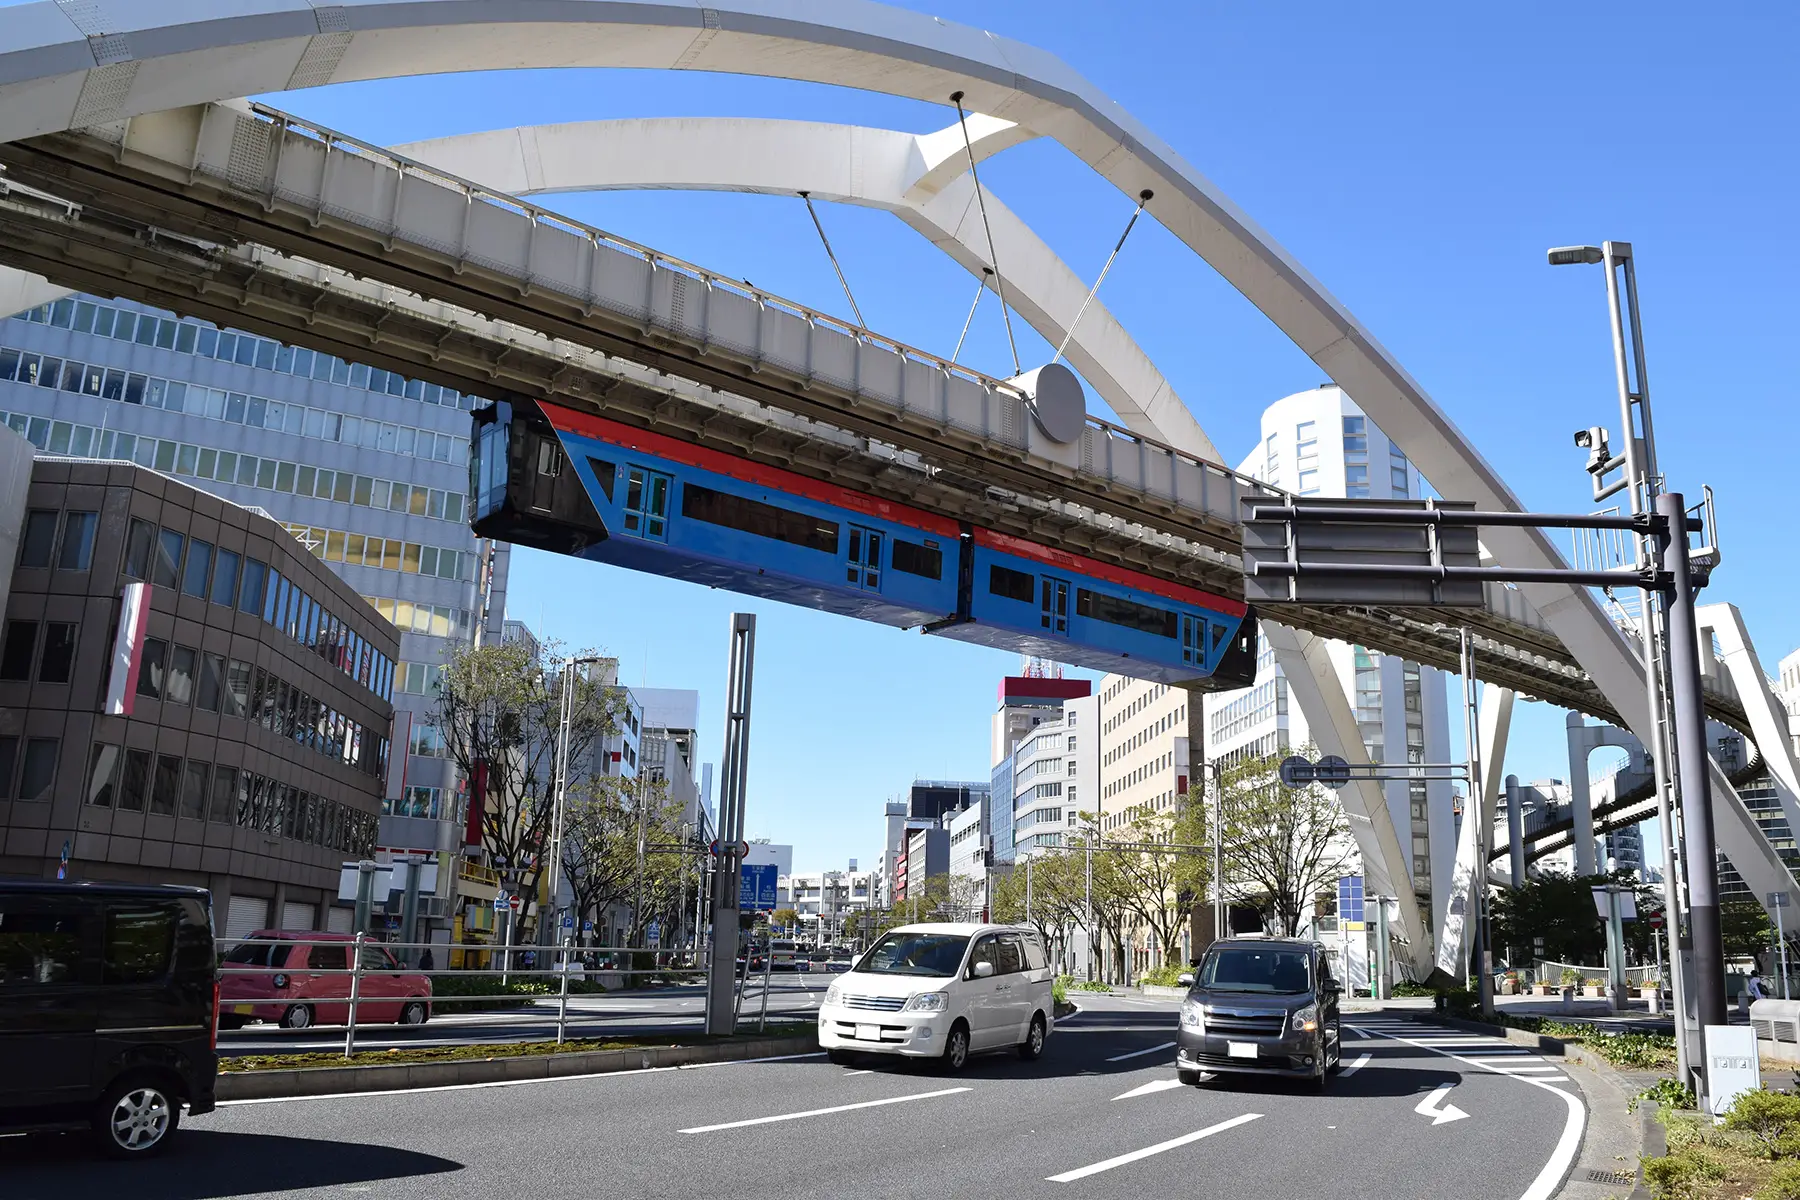 A monorail going above a road in Chiba, Japan.